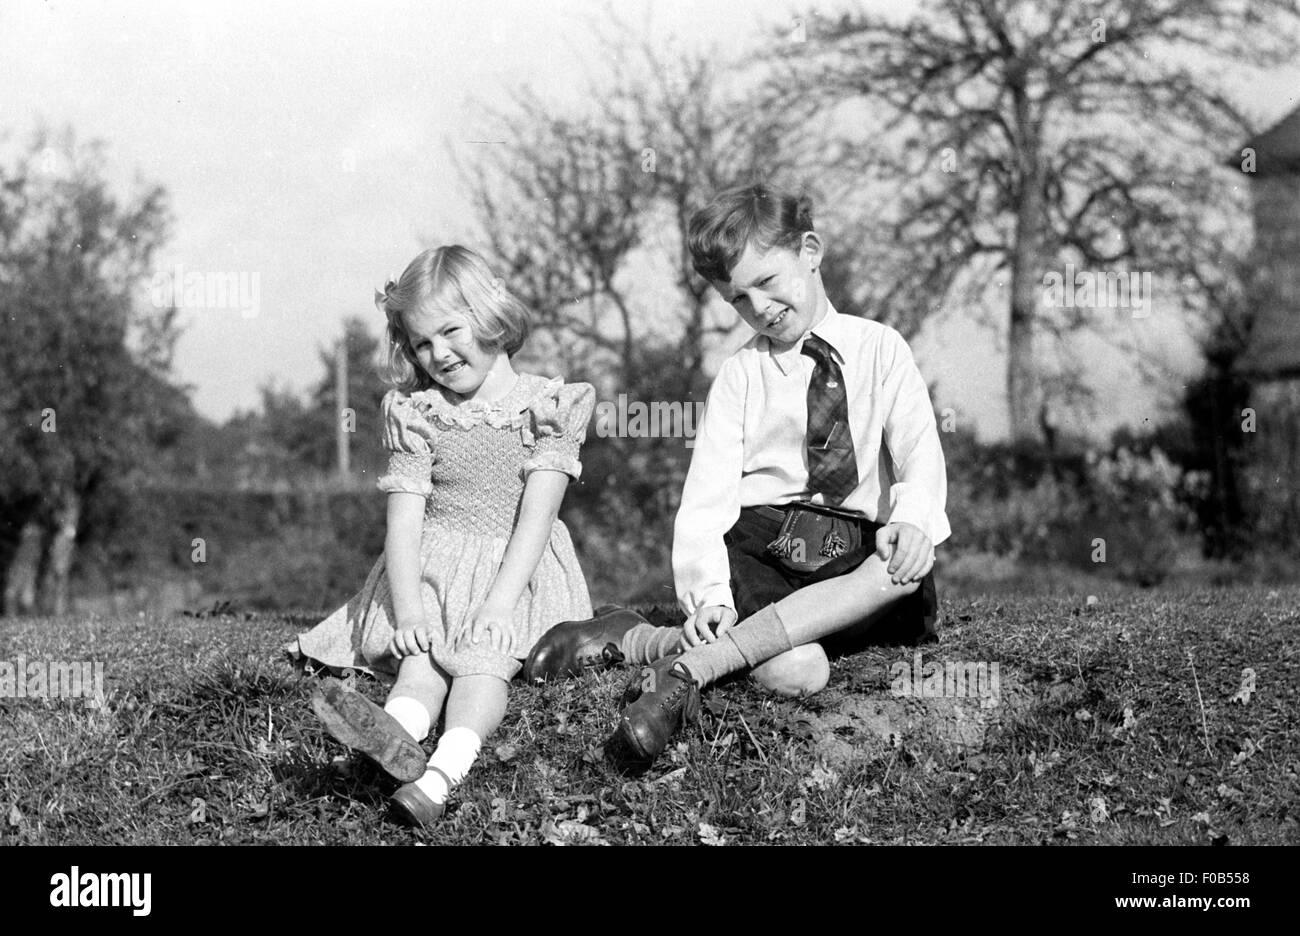 A little girl with blonde hair posing in the garden with her older brother Stock Photo